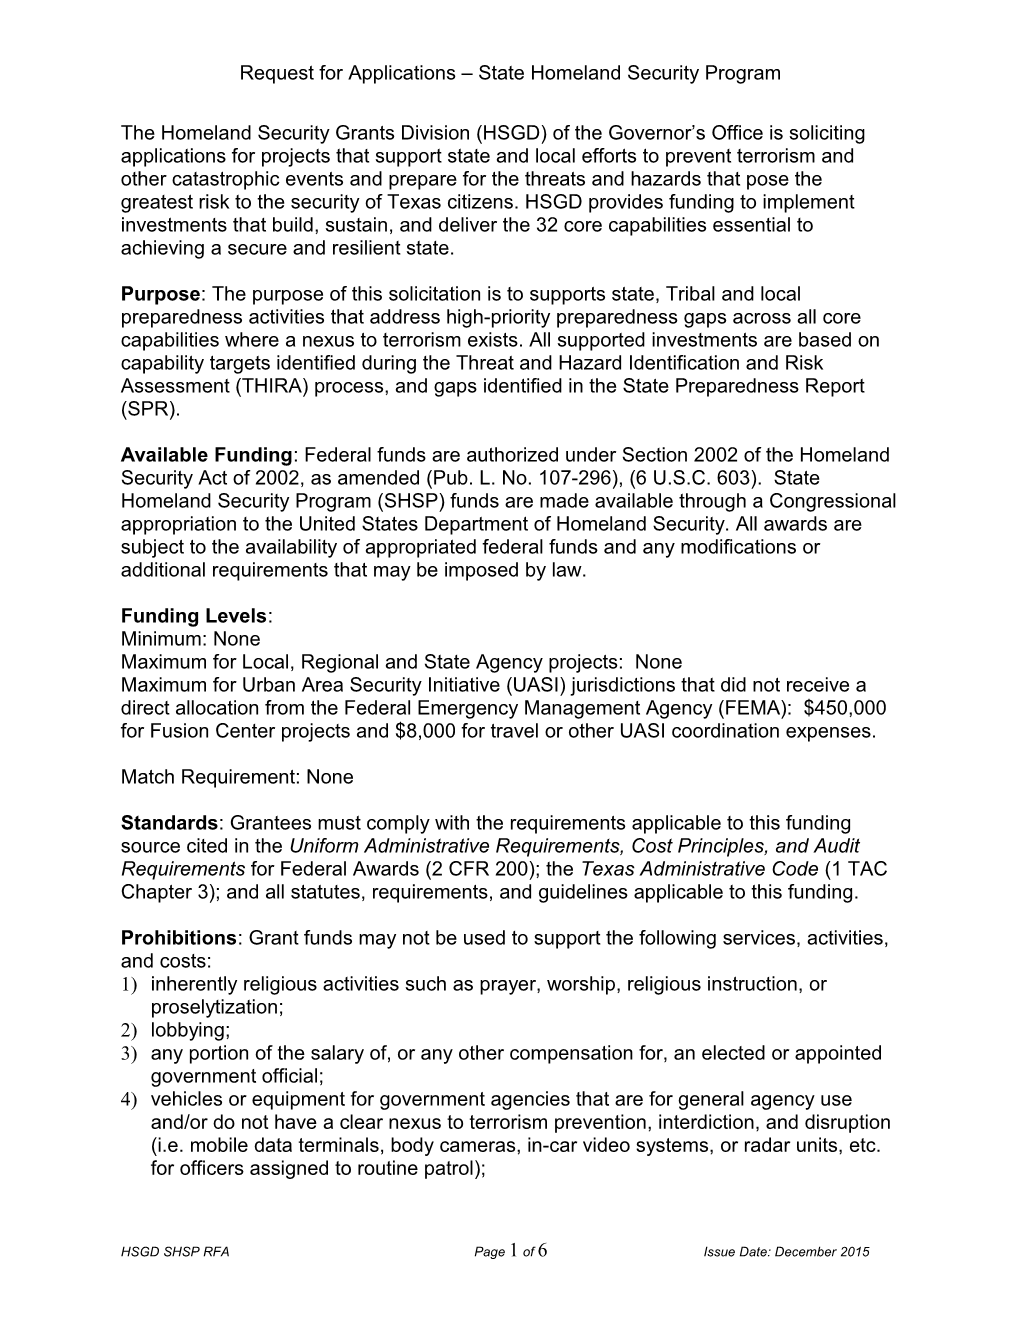 Request for Applications State Homeland Security Program